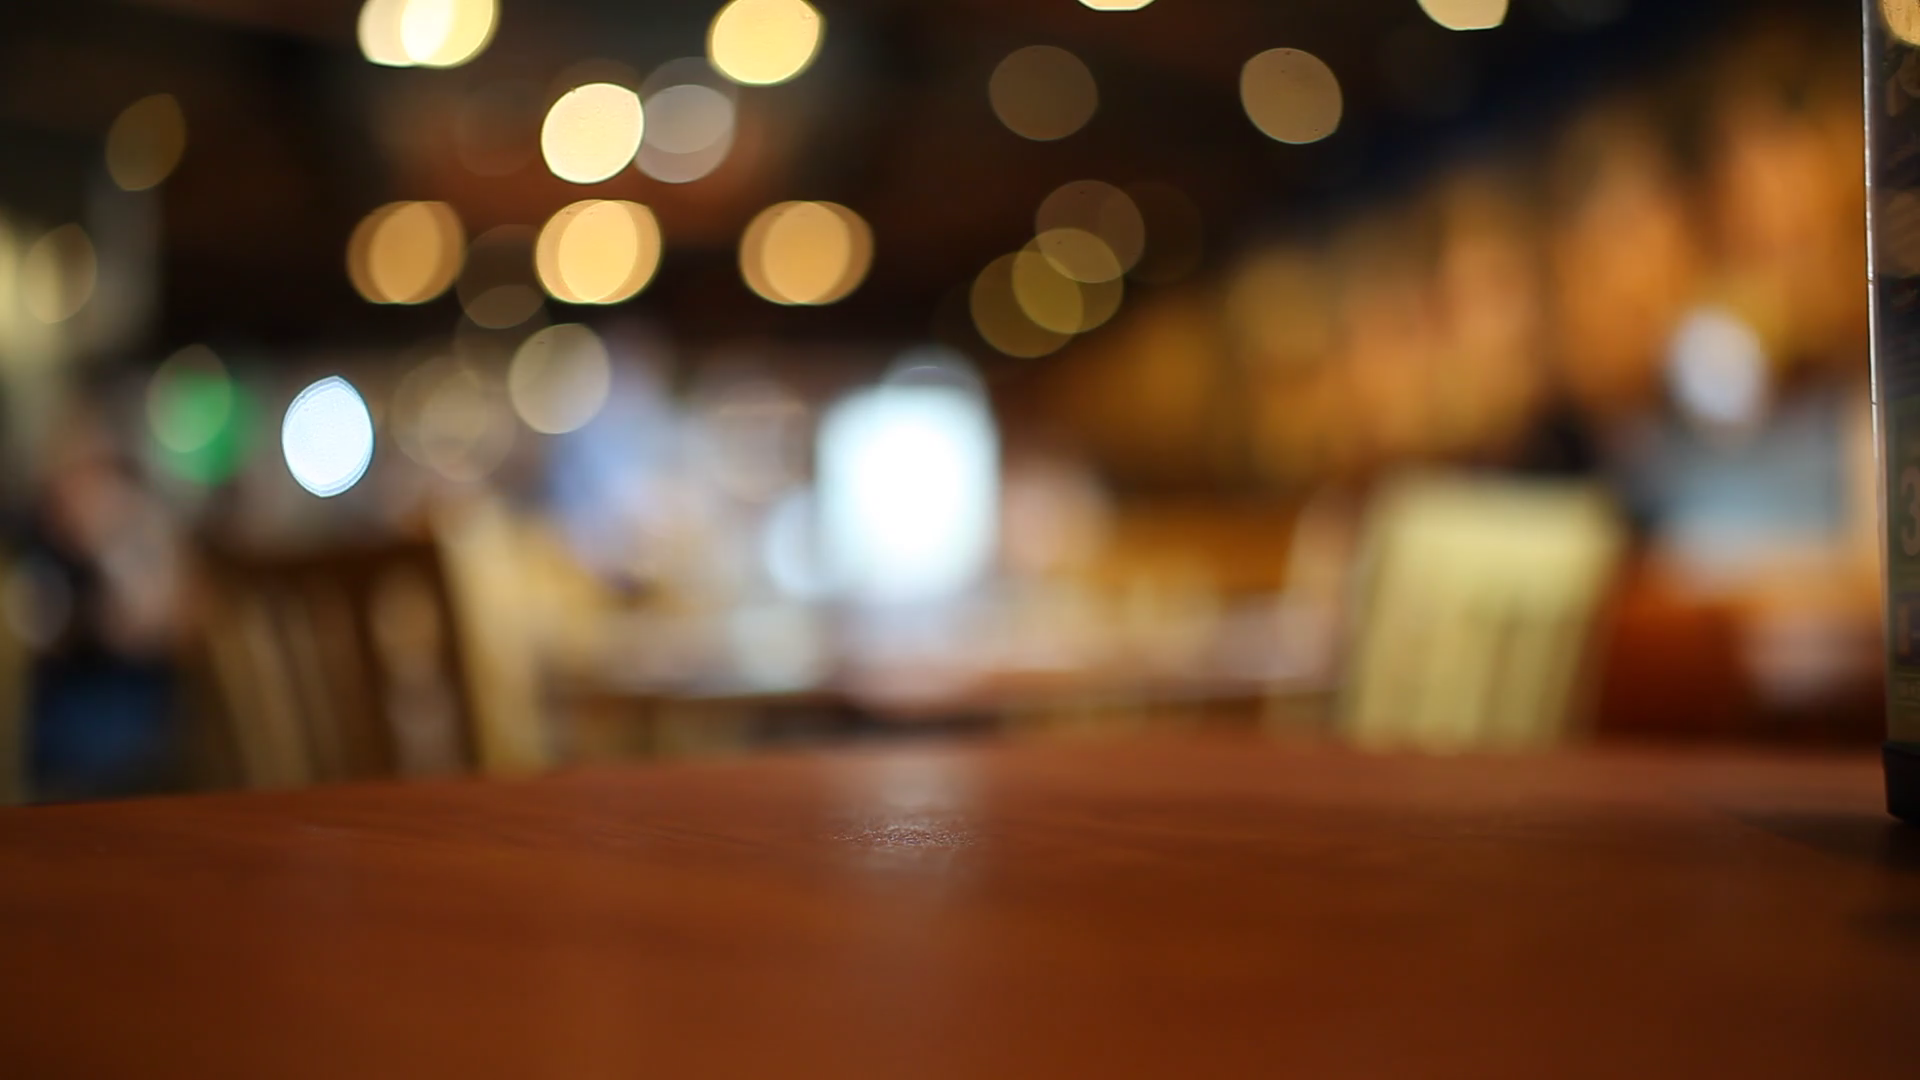 Table at restaurant blurred background Stock Video Footage - Videoblocks